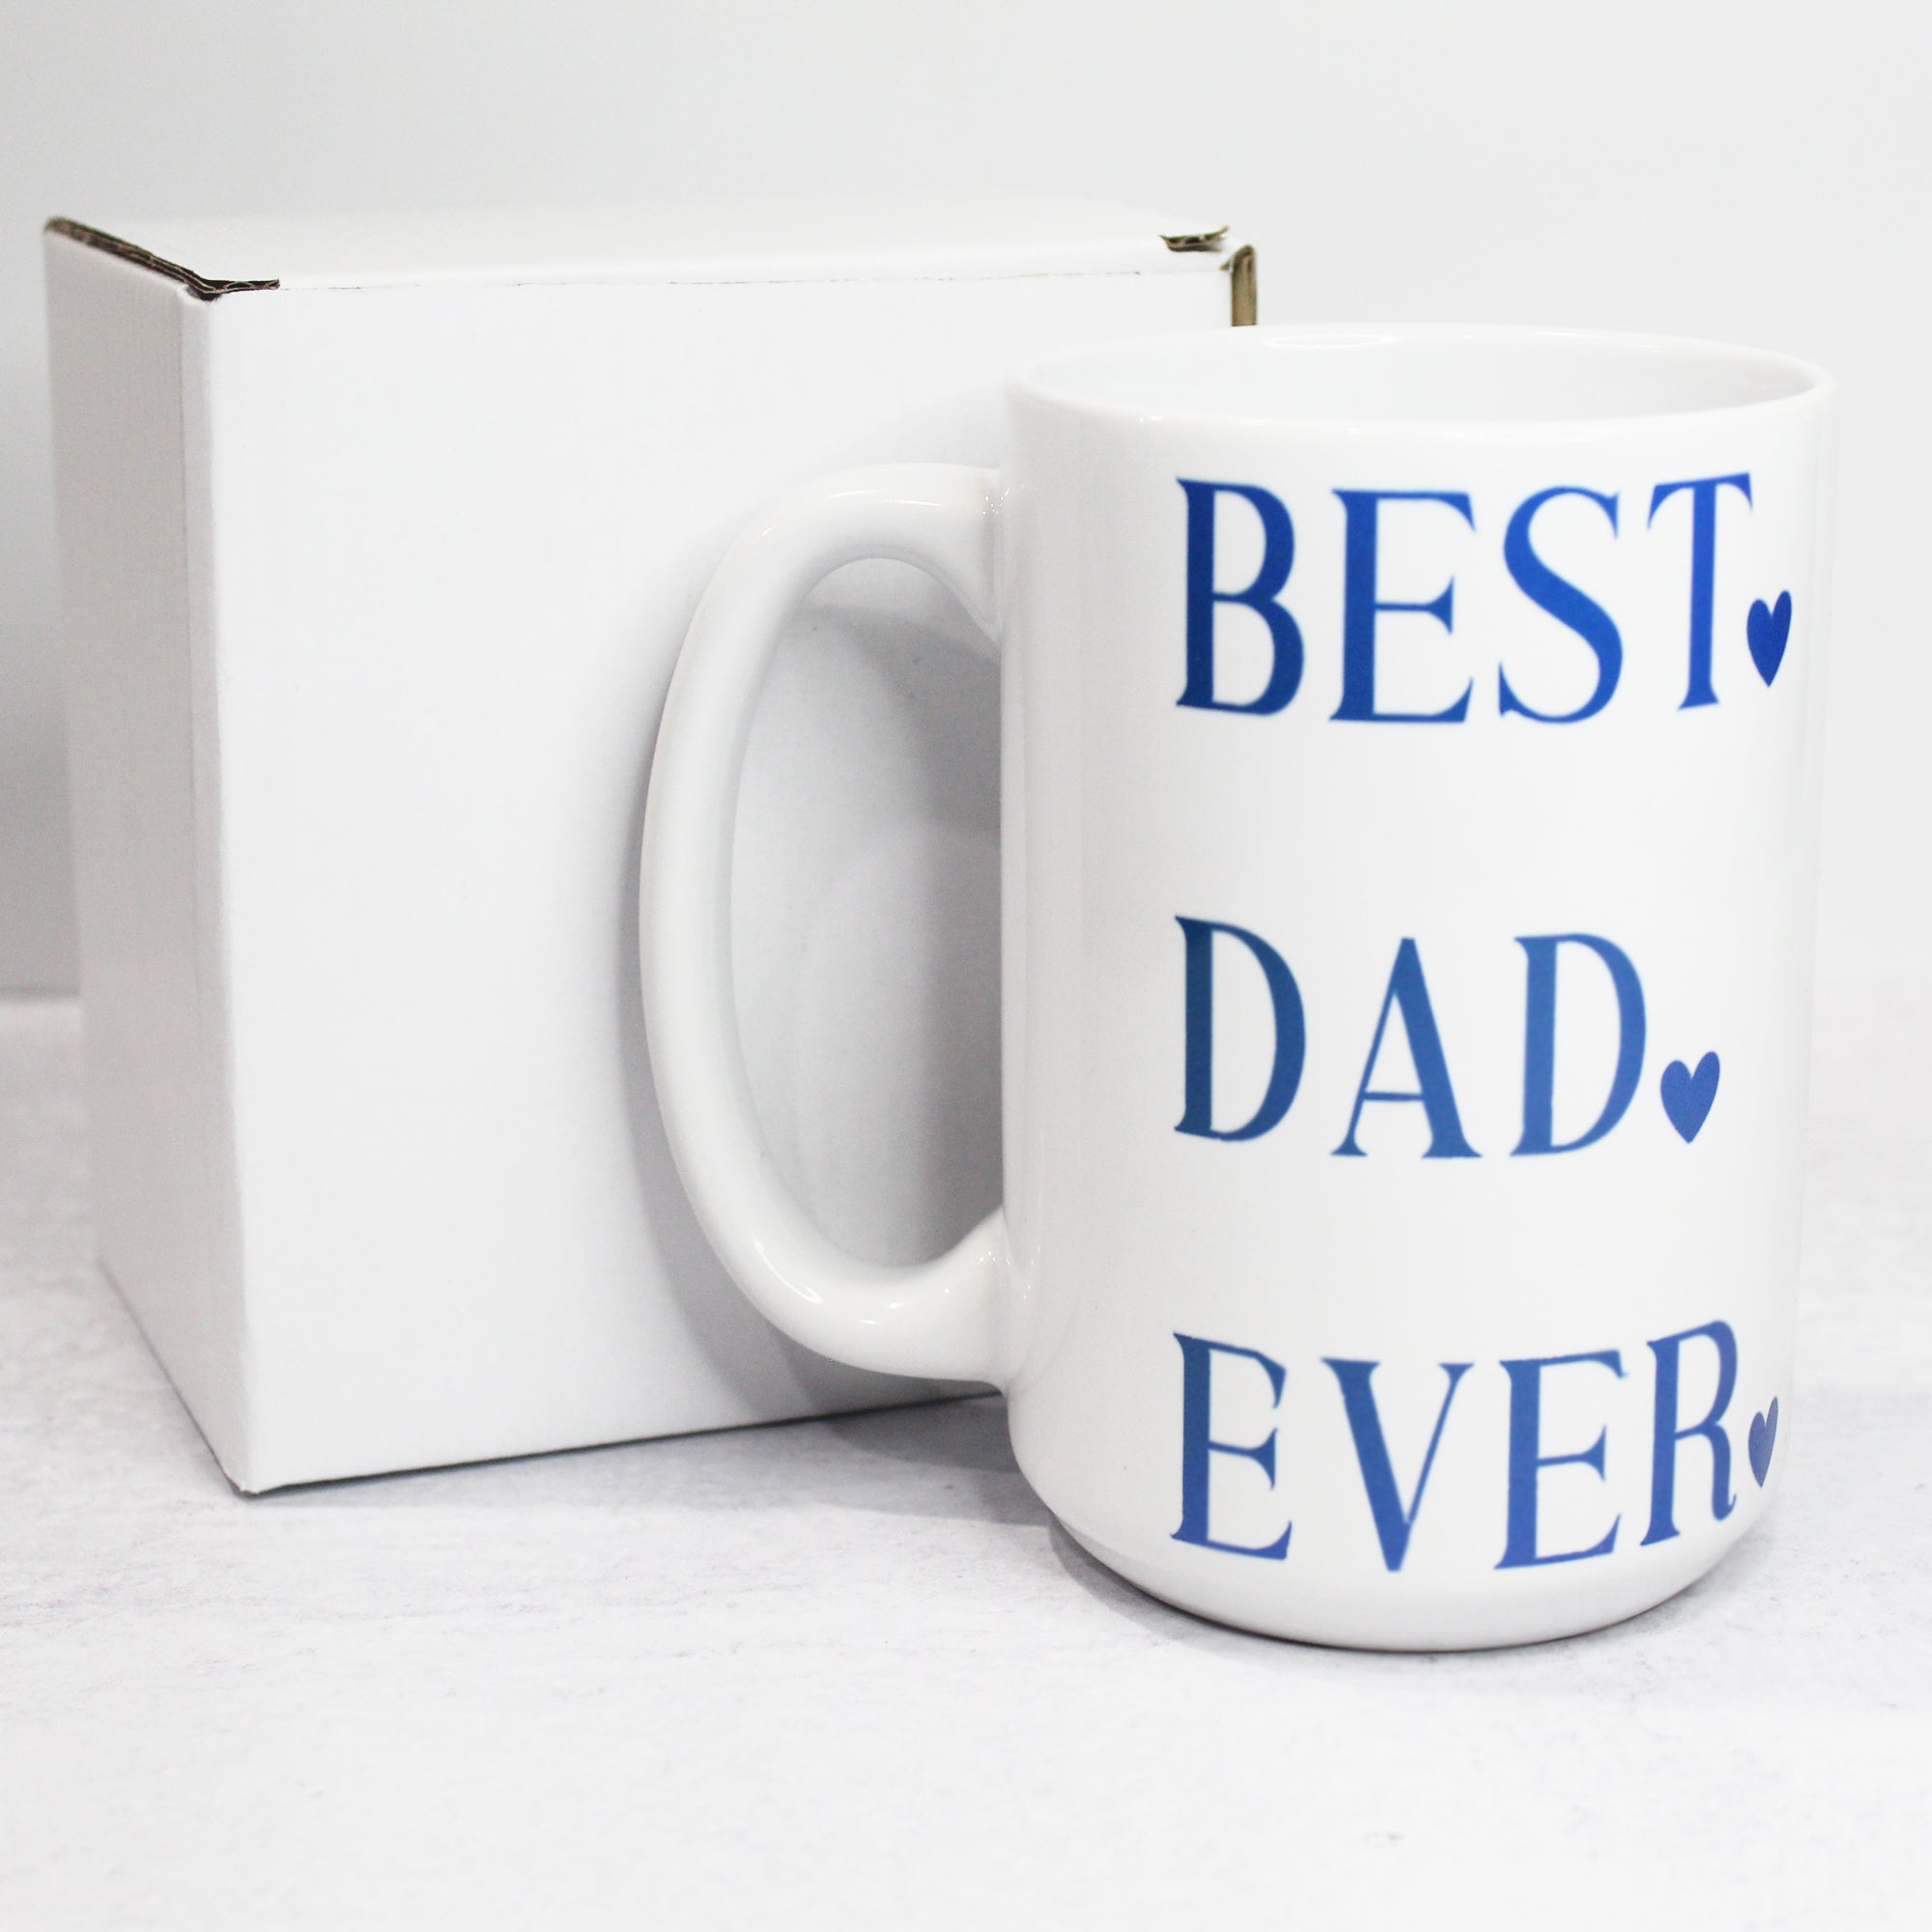 Best Dad Ever Coffee Mug Holiday Gifts For Dad From Daugther, Best Dad Ever Coffee Cups, Men Coffee Mugs, 15 oz Coffee Mugs - Packaging